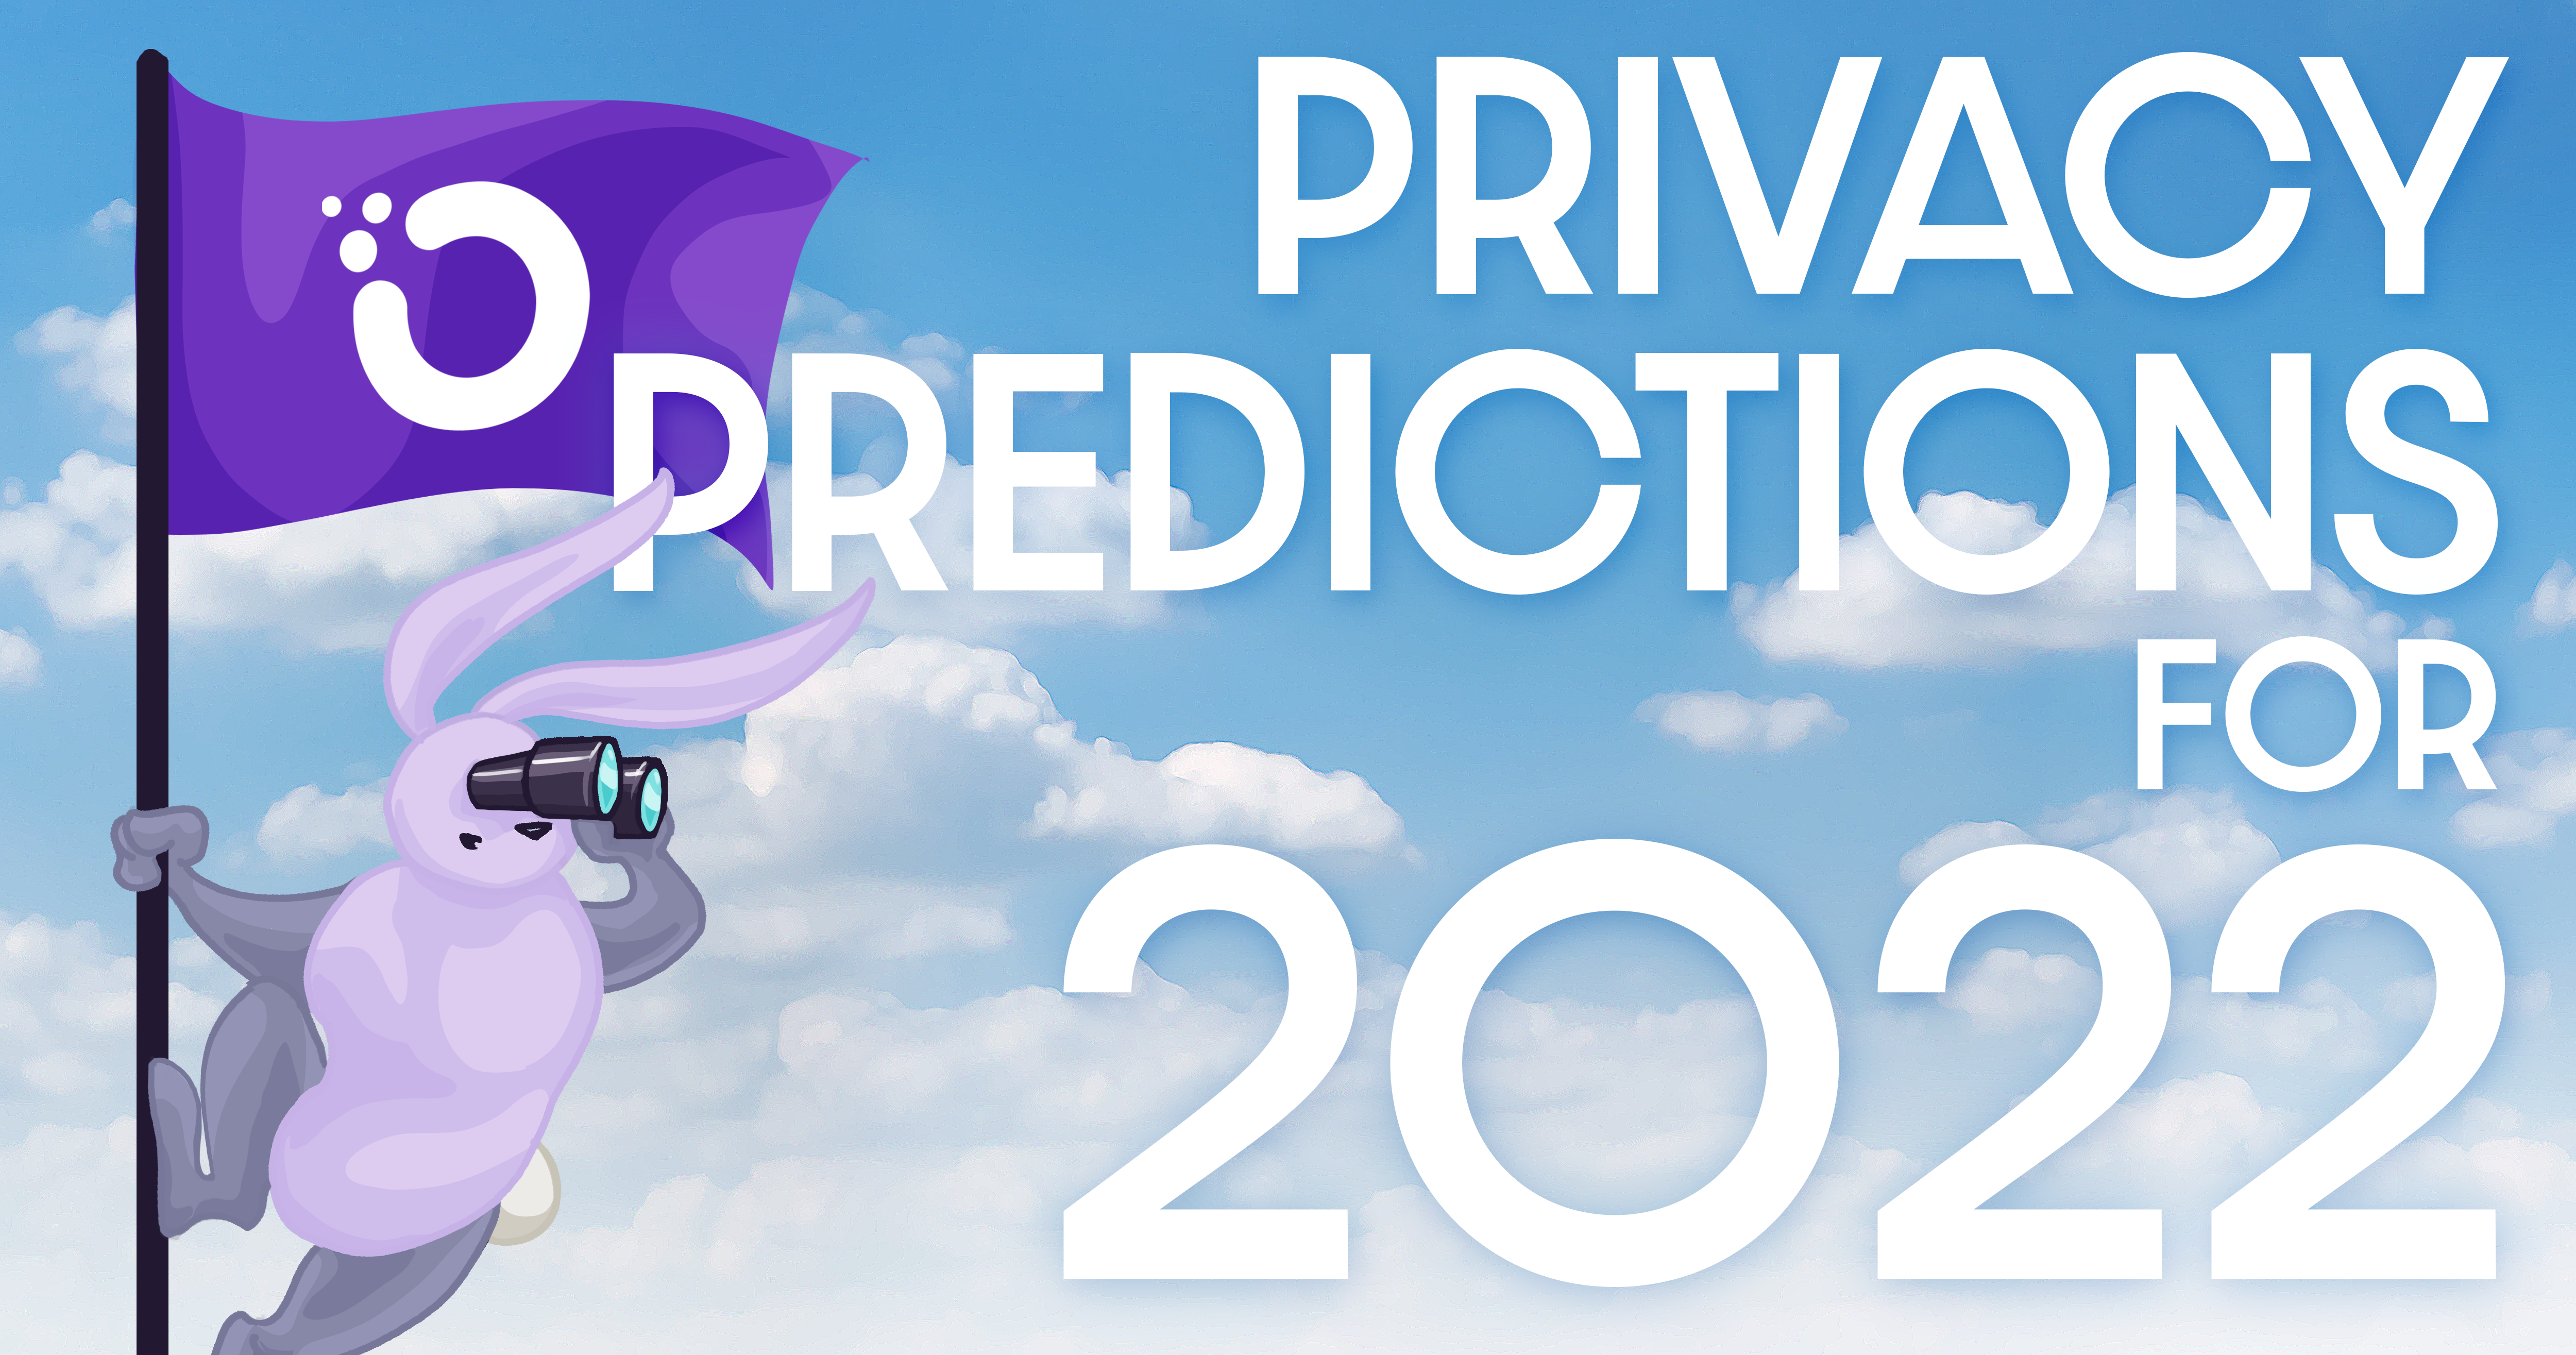 Digital privacy in 2022: Orchid’s top 5 privacy predictions for the coming year